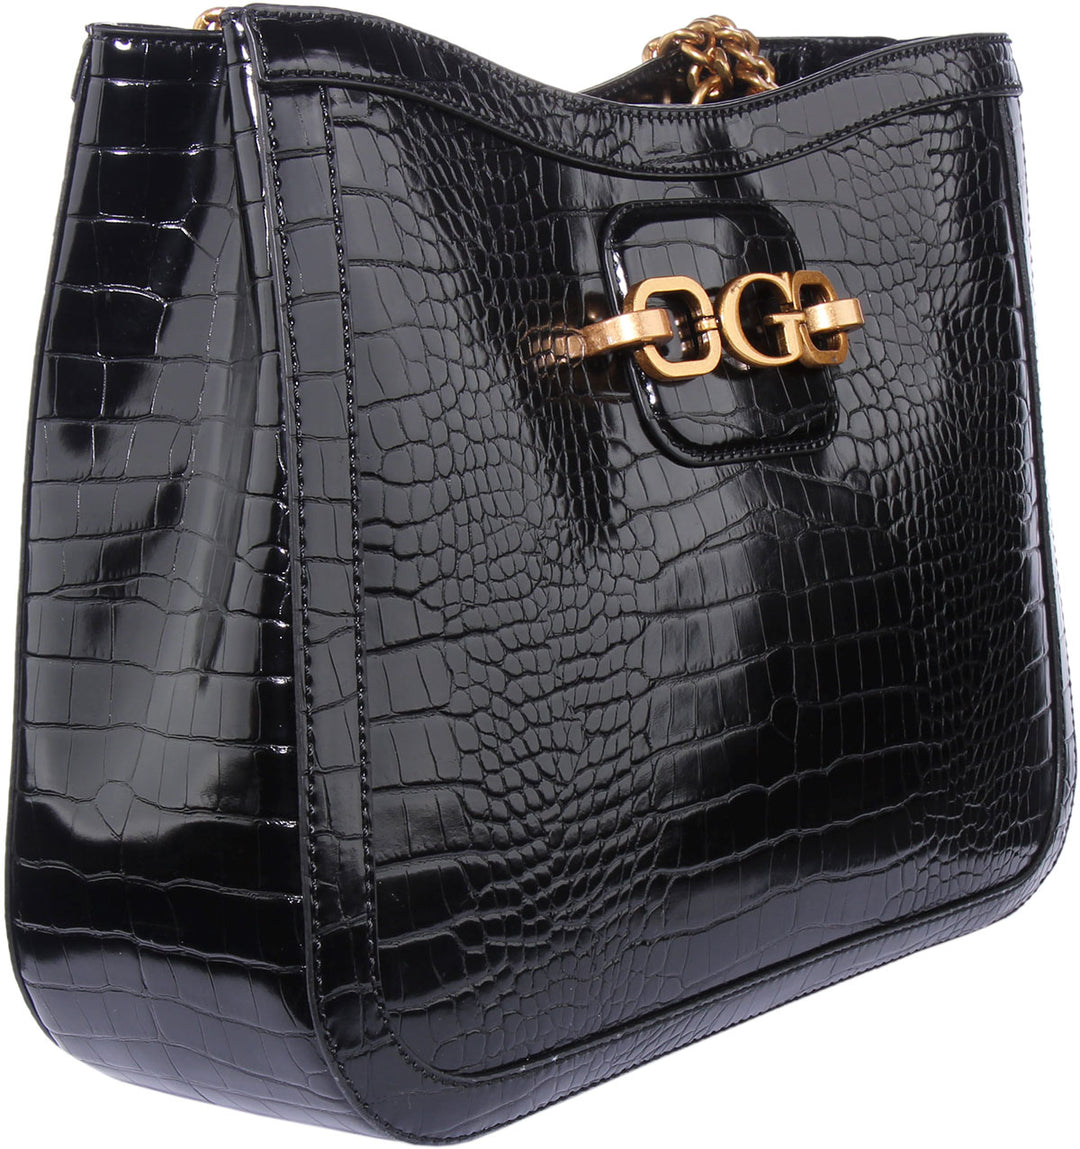 Guess Hensely G Croc Tote In Black For Women